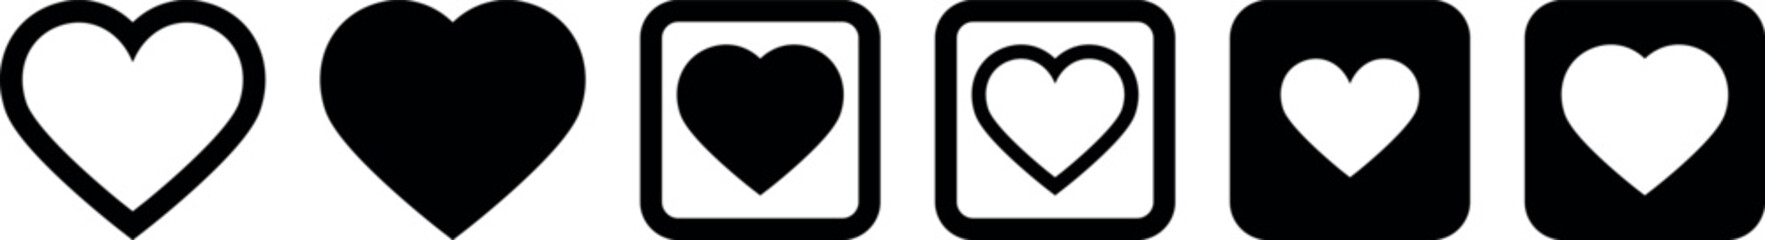 Heart. A heart icon. Simple illustration in black, filled and transparent.